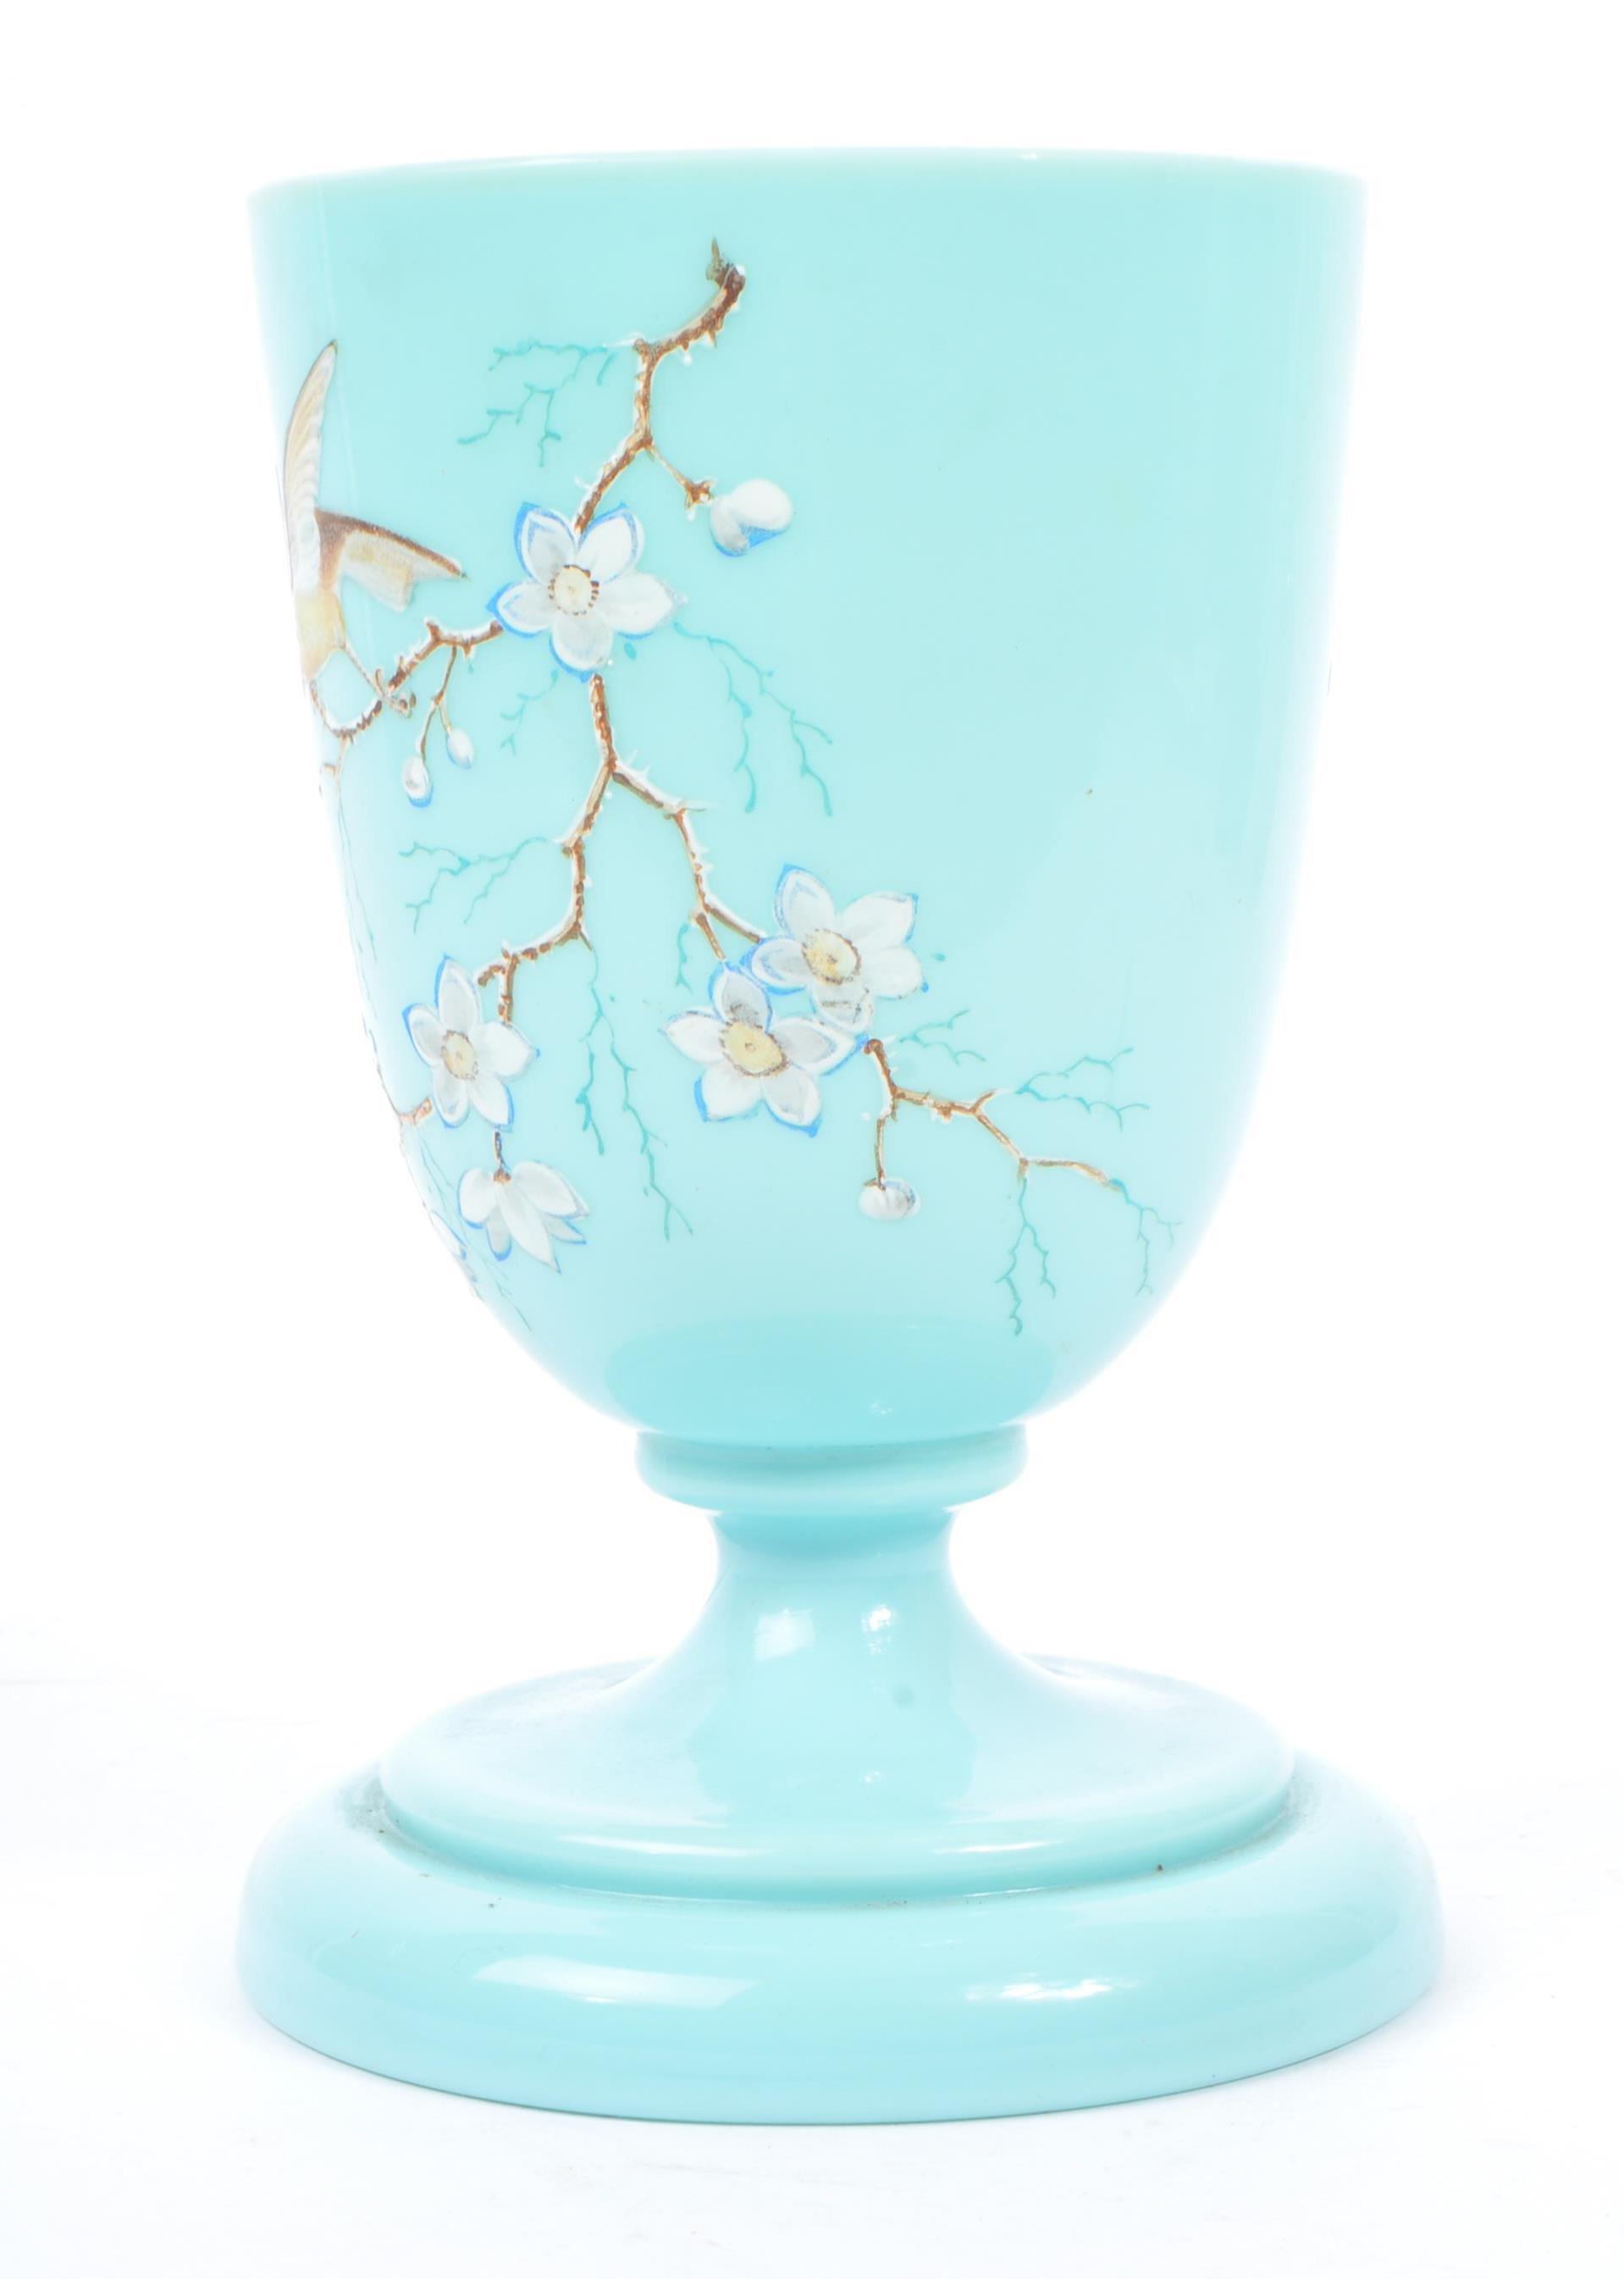 19TH CENTURY BLUE OPAQUE GLASS HAND PAINTED VASE - Image 4 of 7